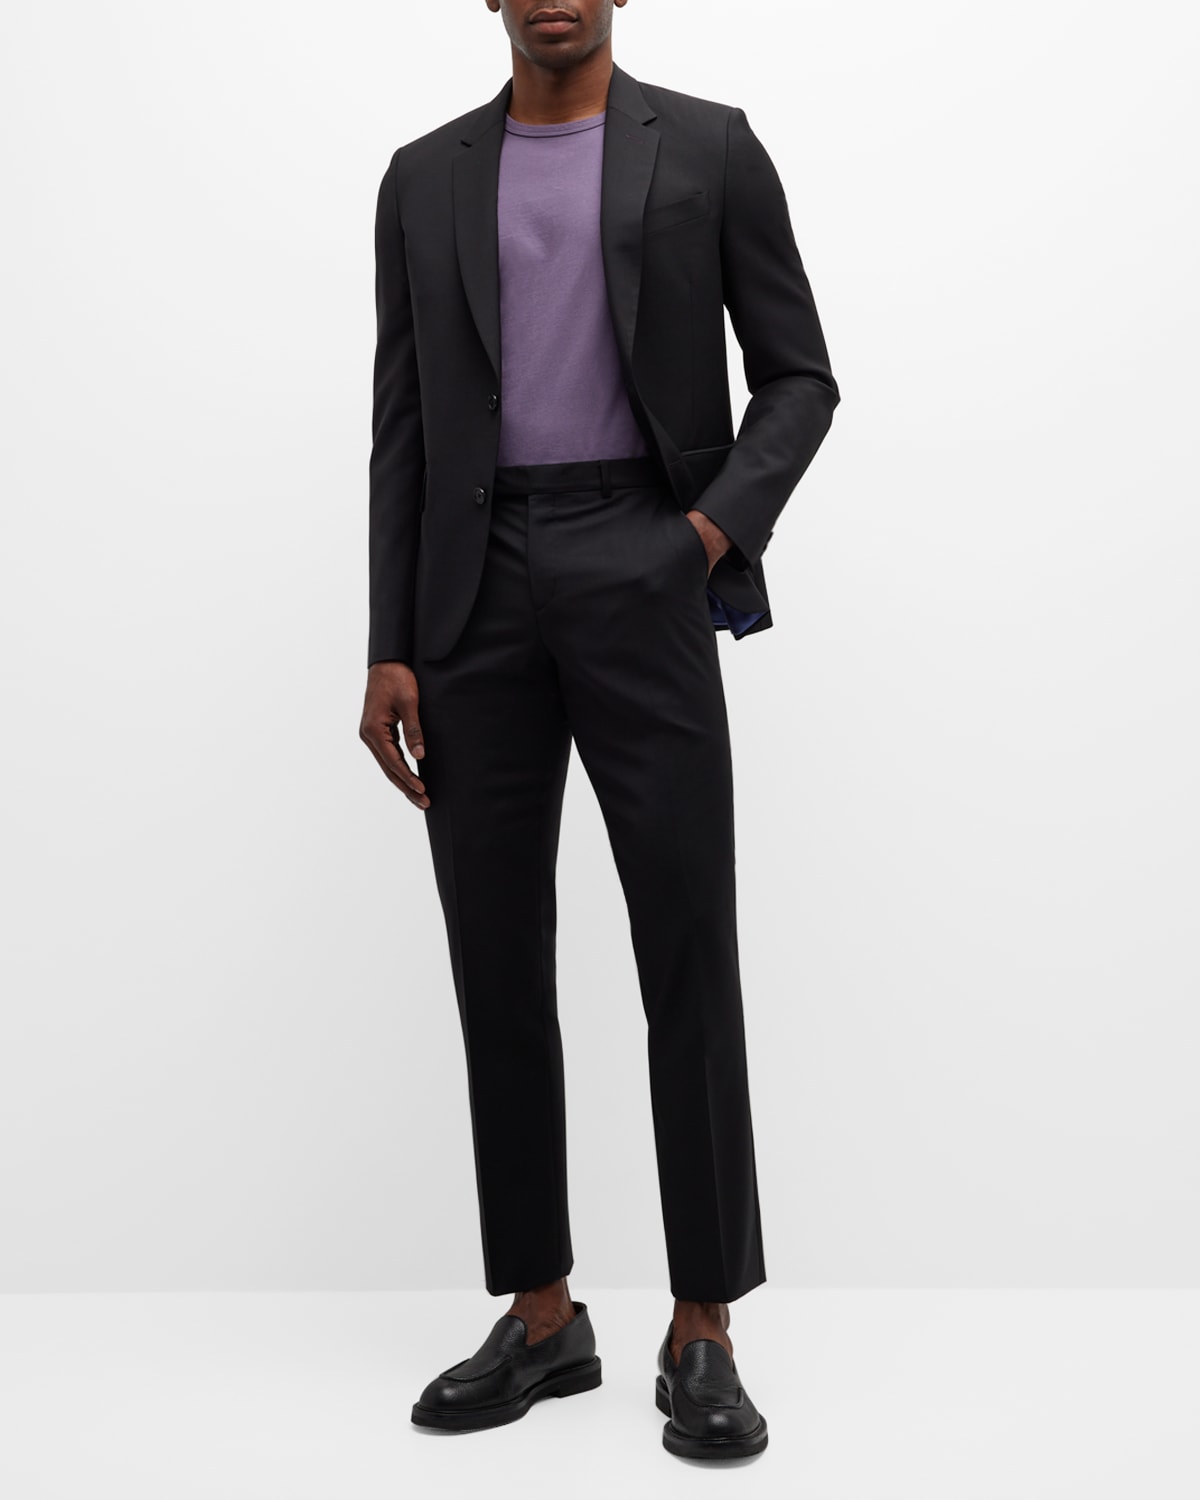 PAUL SMITH MEN'S WOOL-MOHAIR TWO-BUTTON SUIT